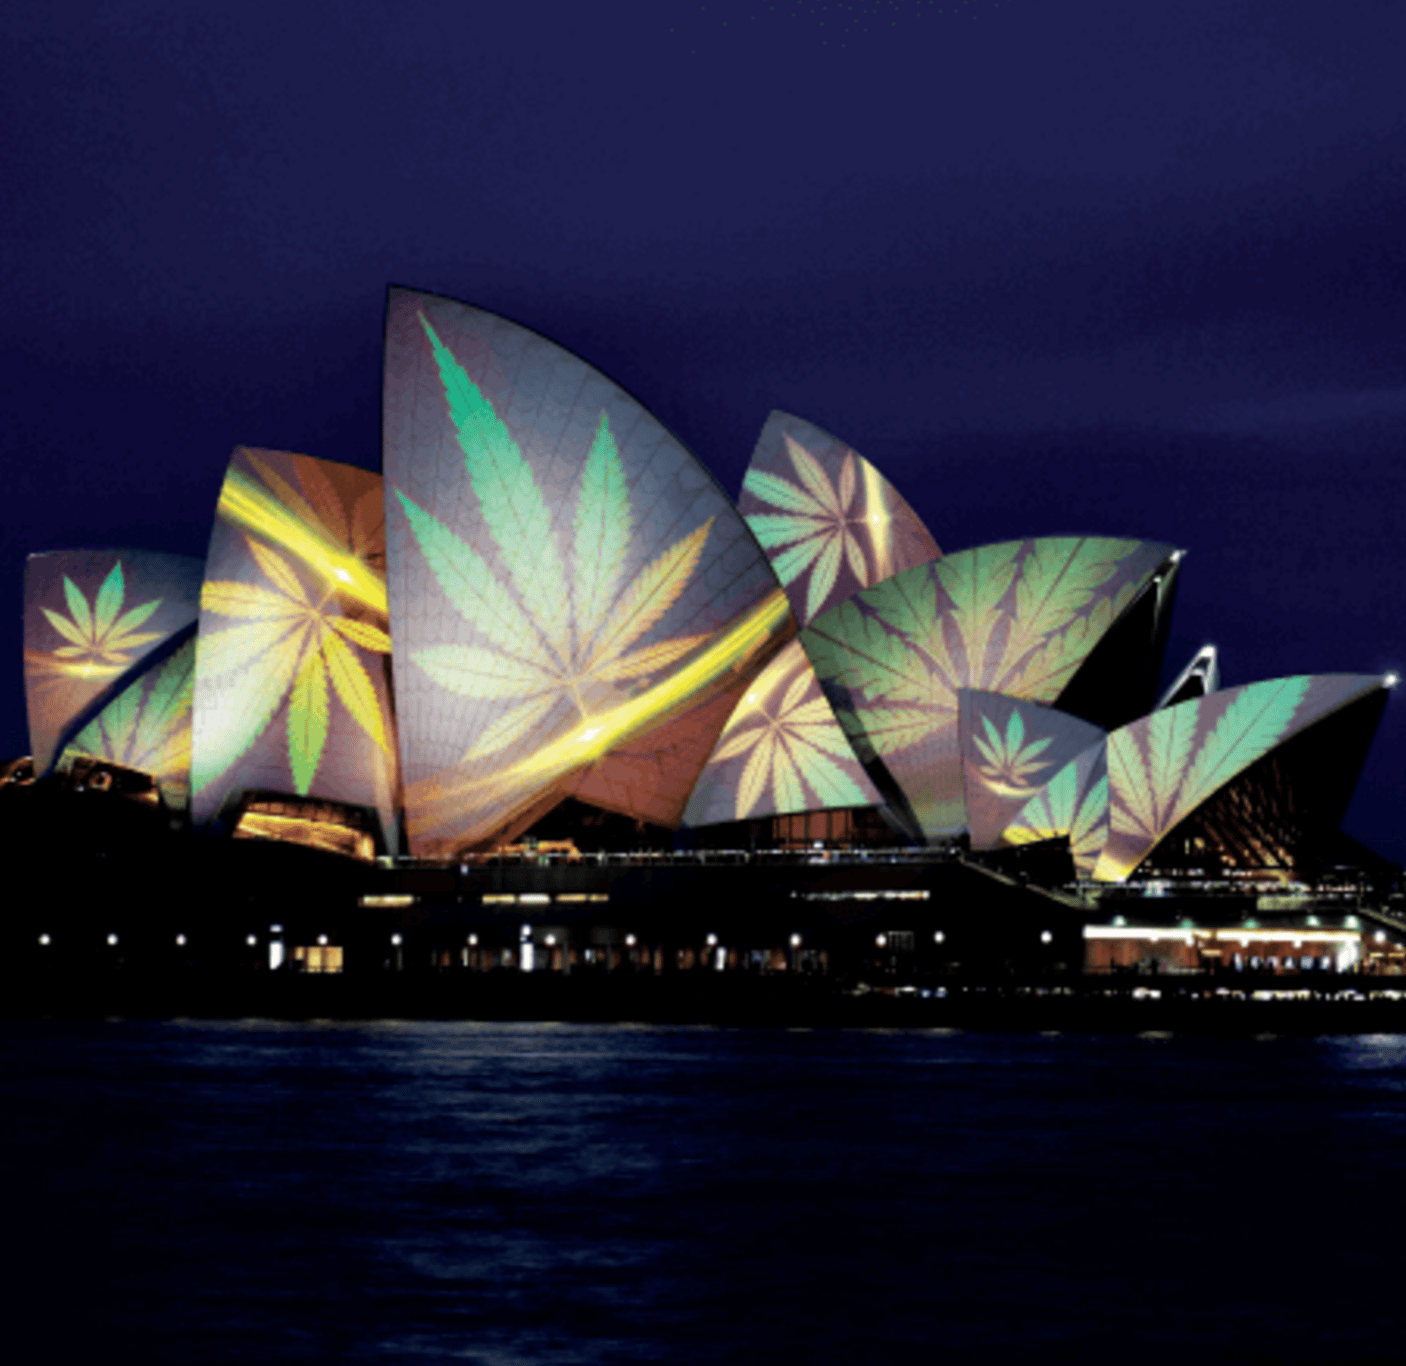 Australian Activists Face Charges for 4/20 Sydney Opera House Projection Protest